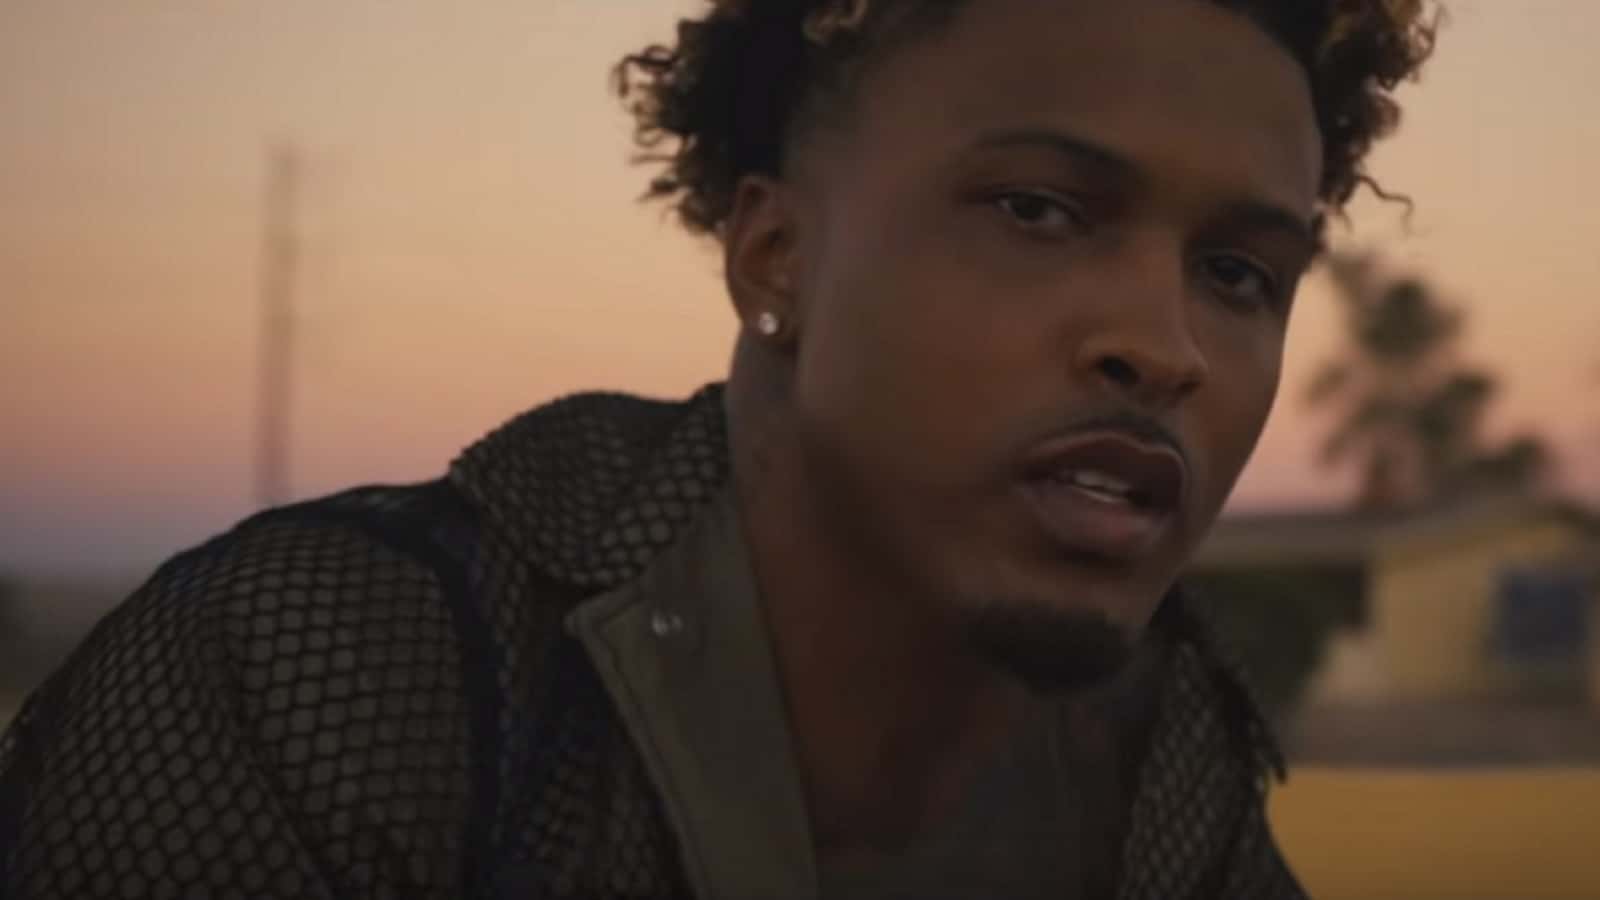 Singer August Alsina Loses His Sister to Cancer Battle